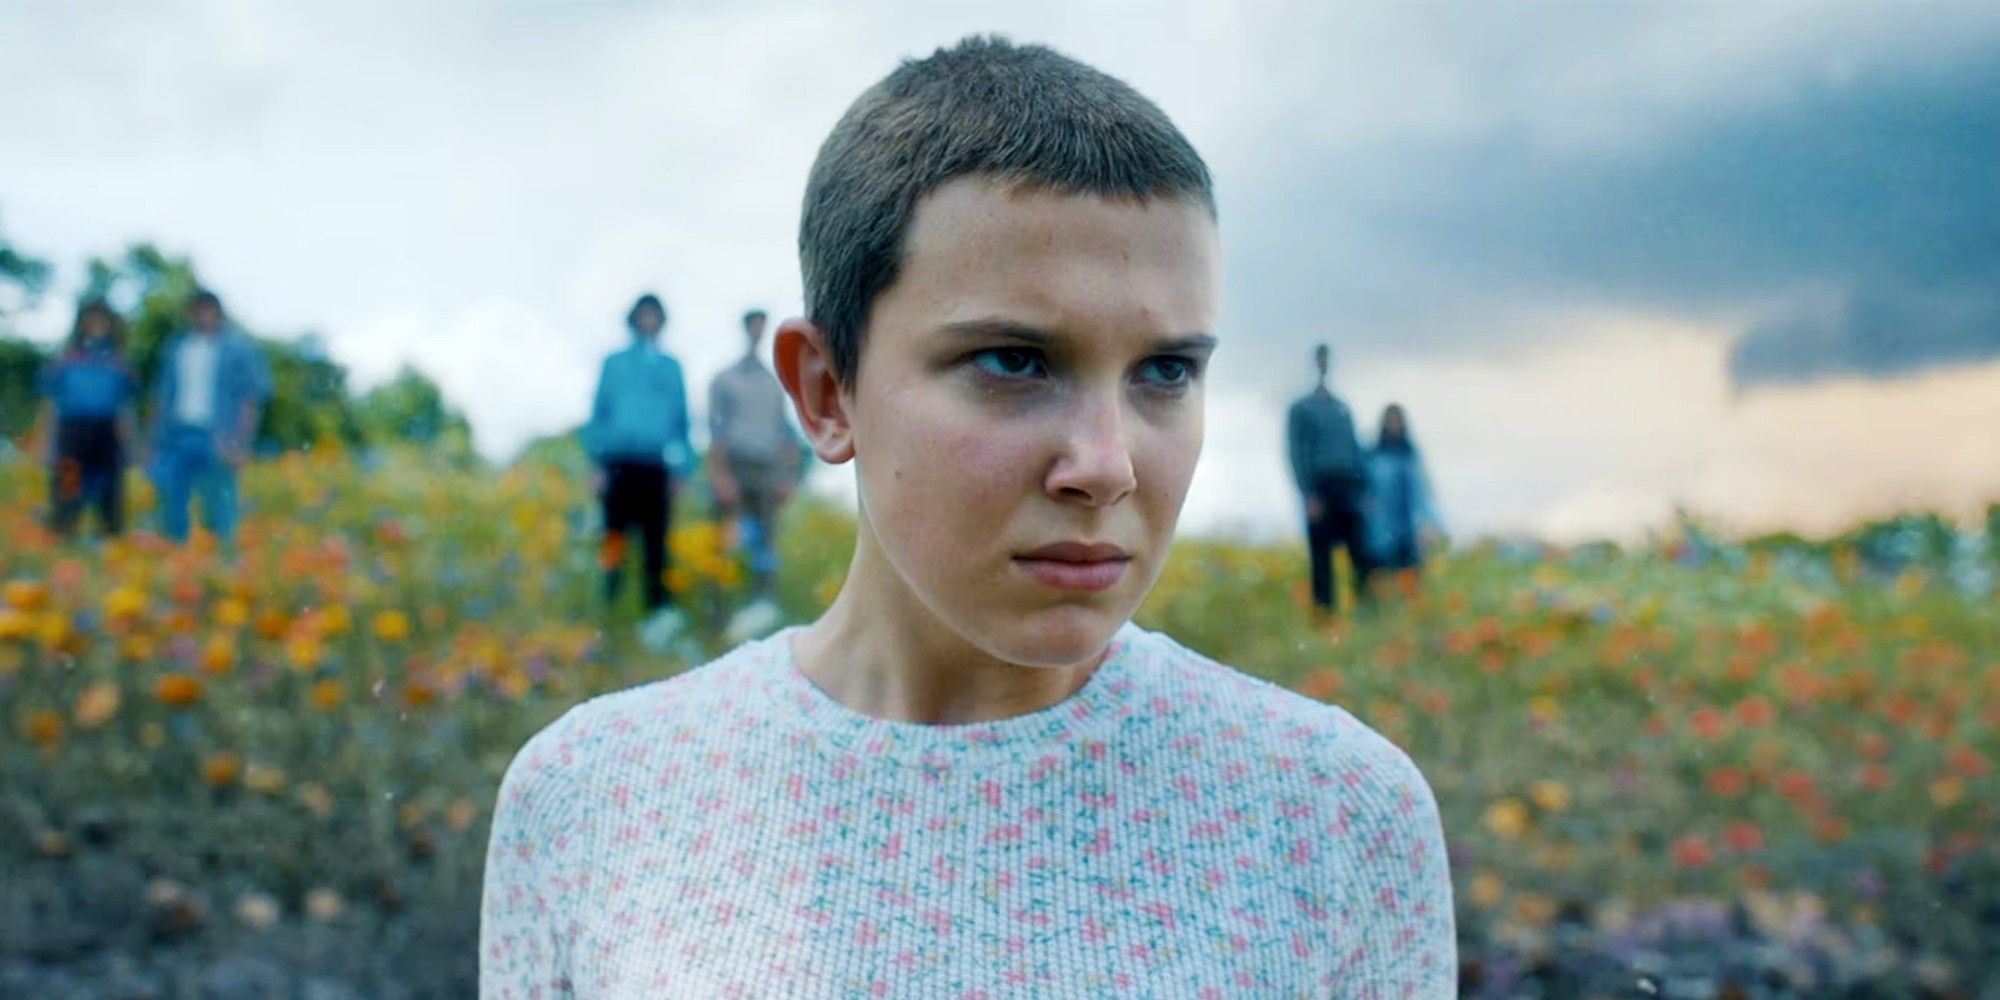 Millie Bobby Brown as Eleven looking into the distance in Stranger Things 4